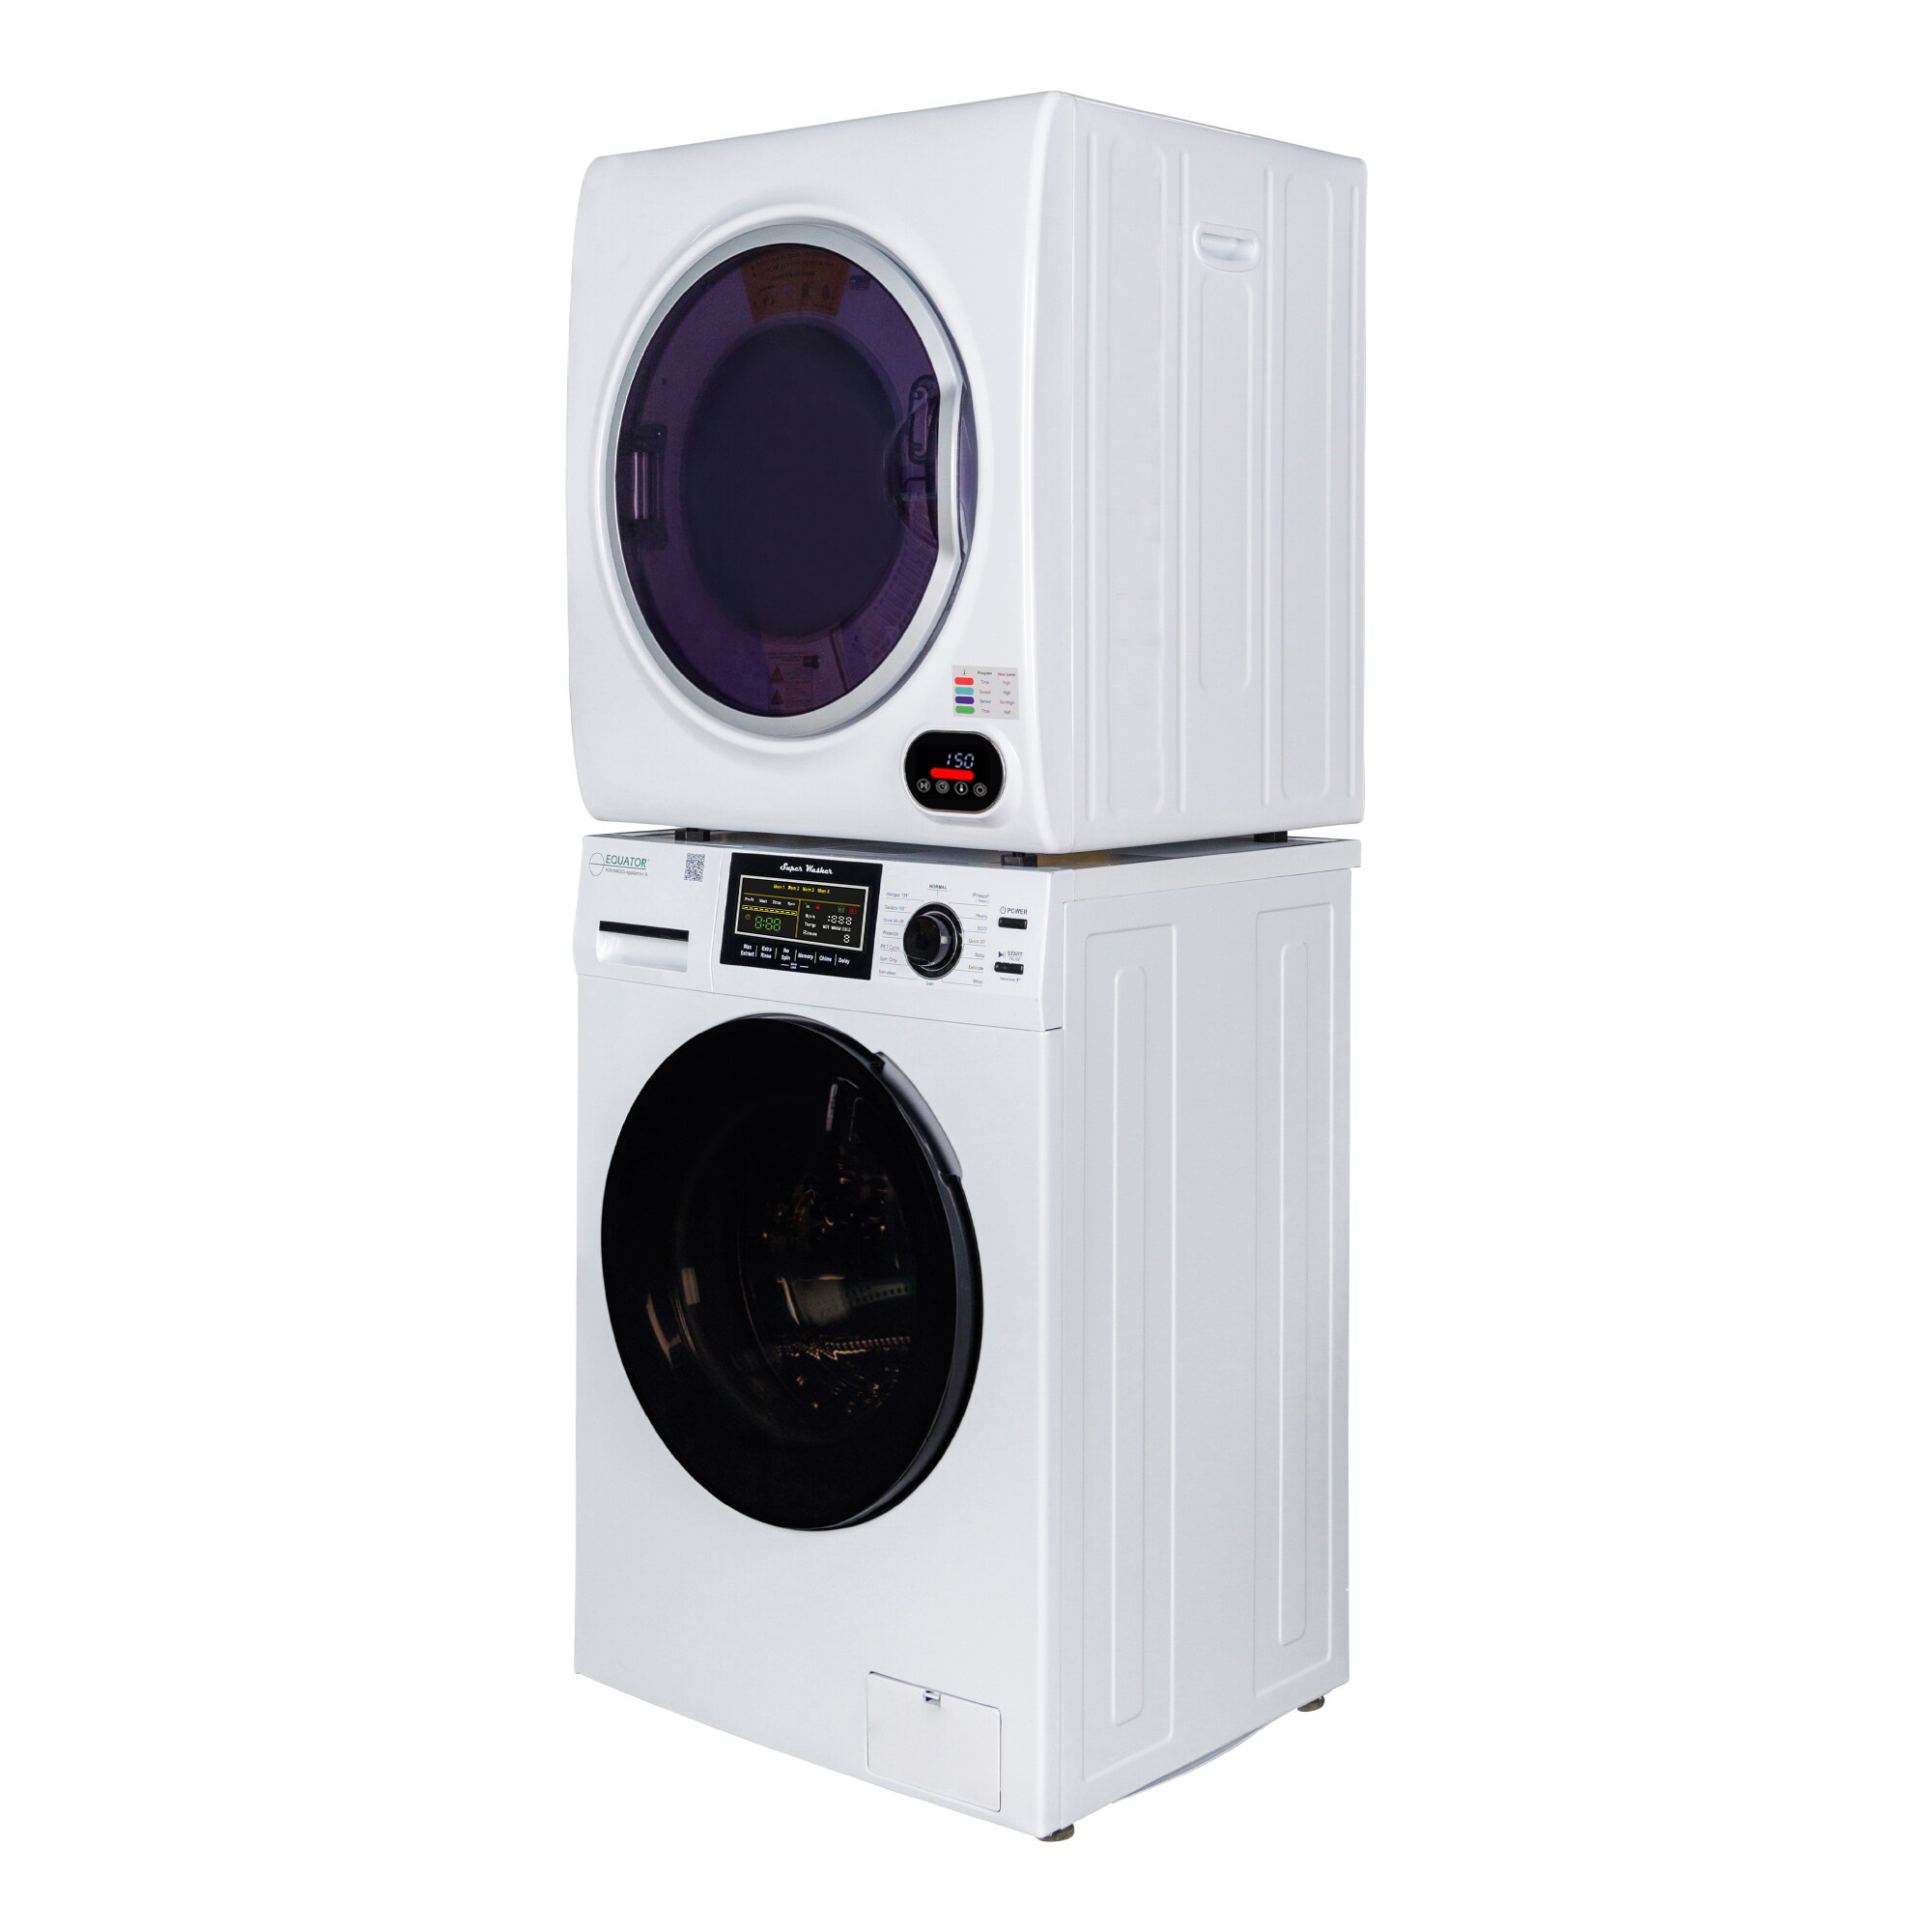 Equator ED852 24 Inch Electric Dryer with 3.5 cu. ft. Capacity